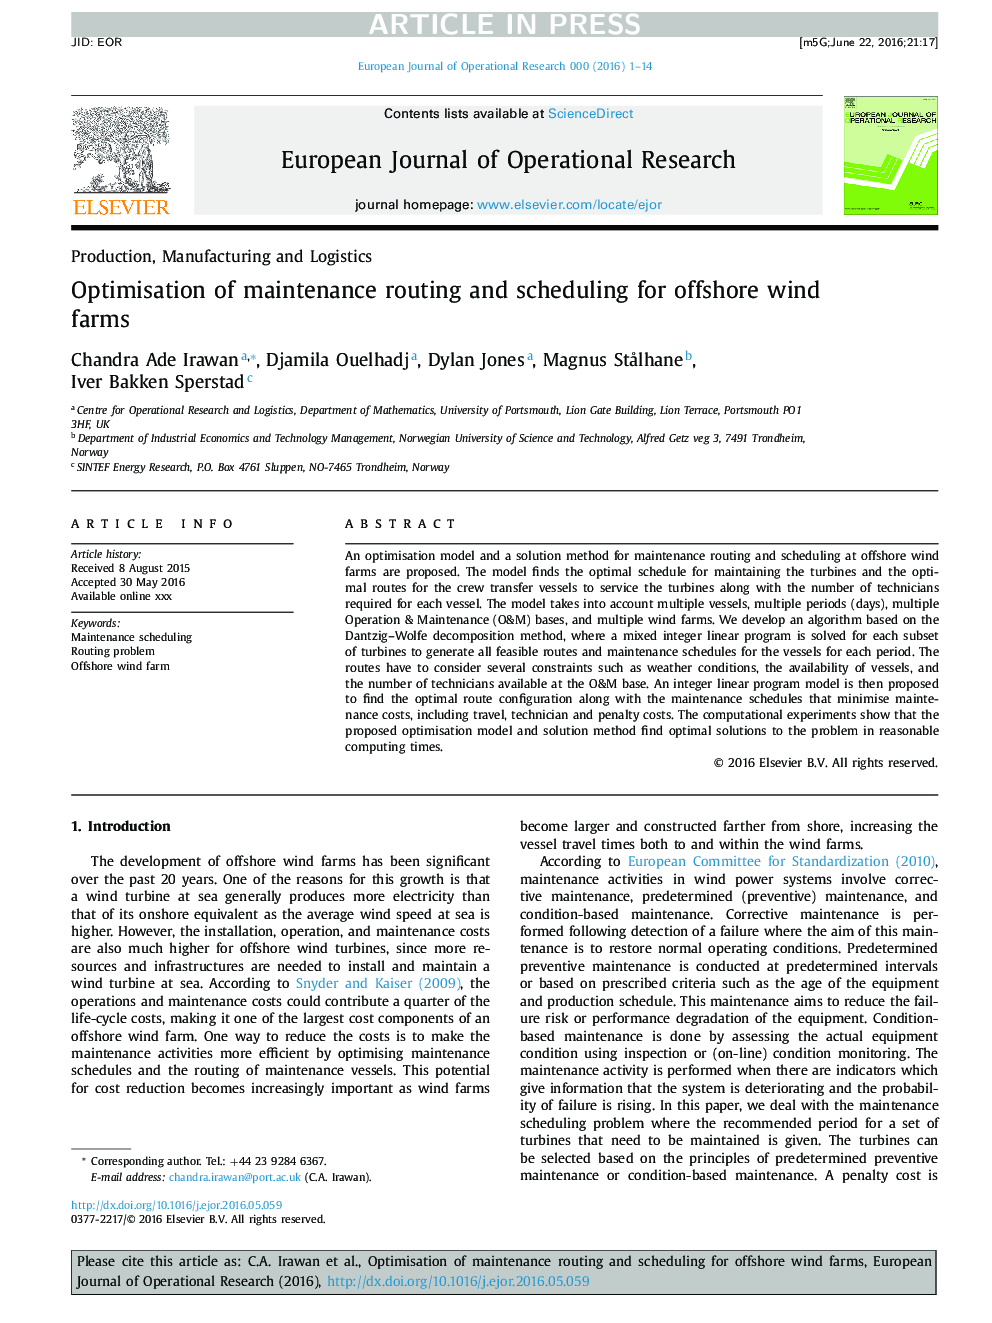 Optimisation of maintenance routing and scheduling for offshore wind farms